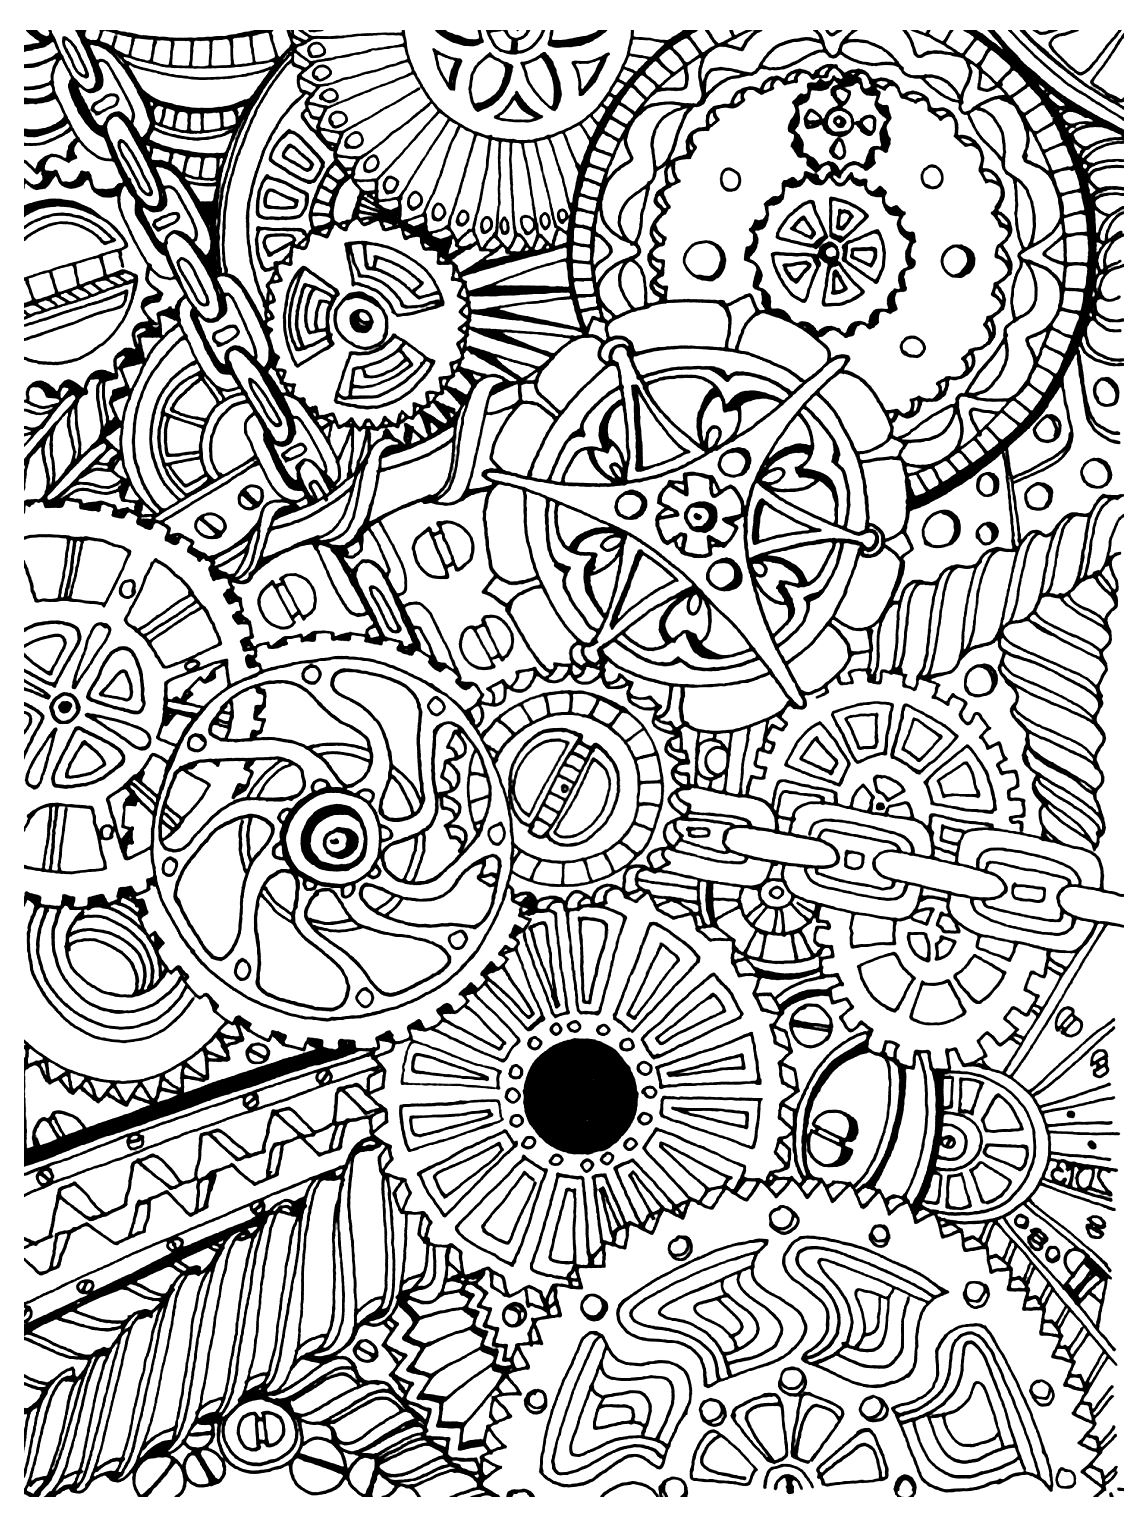 Zen anti stress mechanisms to print - Anti stress Adult Coloring Pages